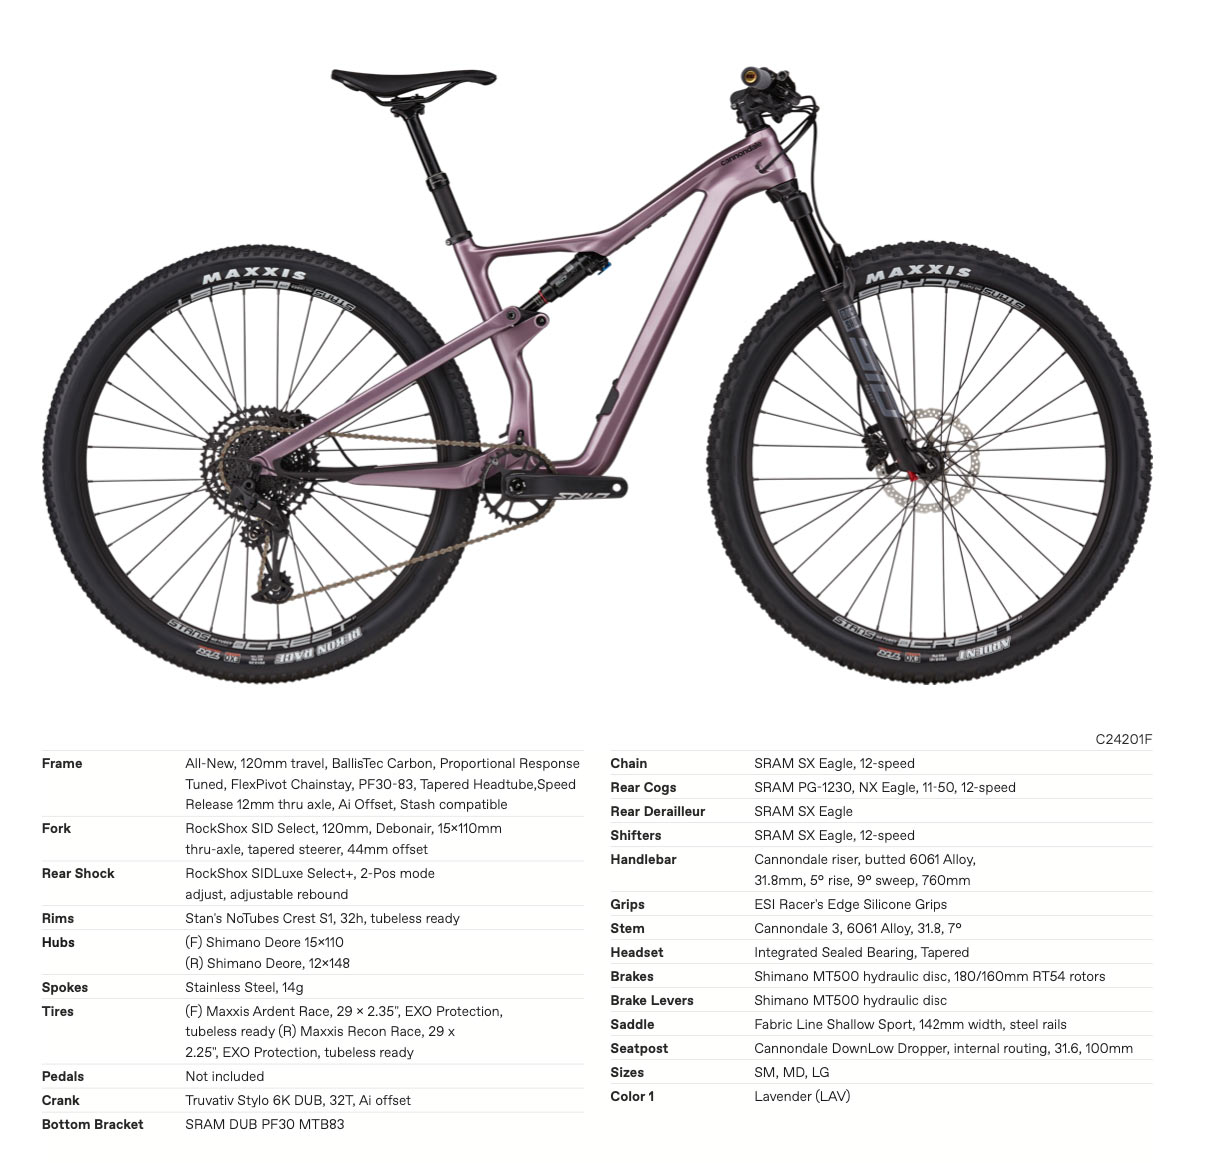 2021 Cannondale Scalpel SE womens mountain bike specs and build components